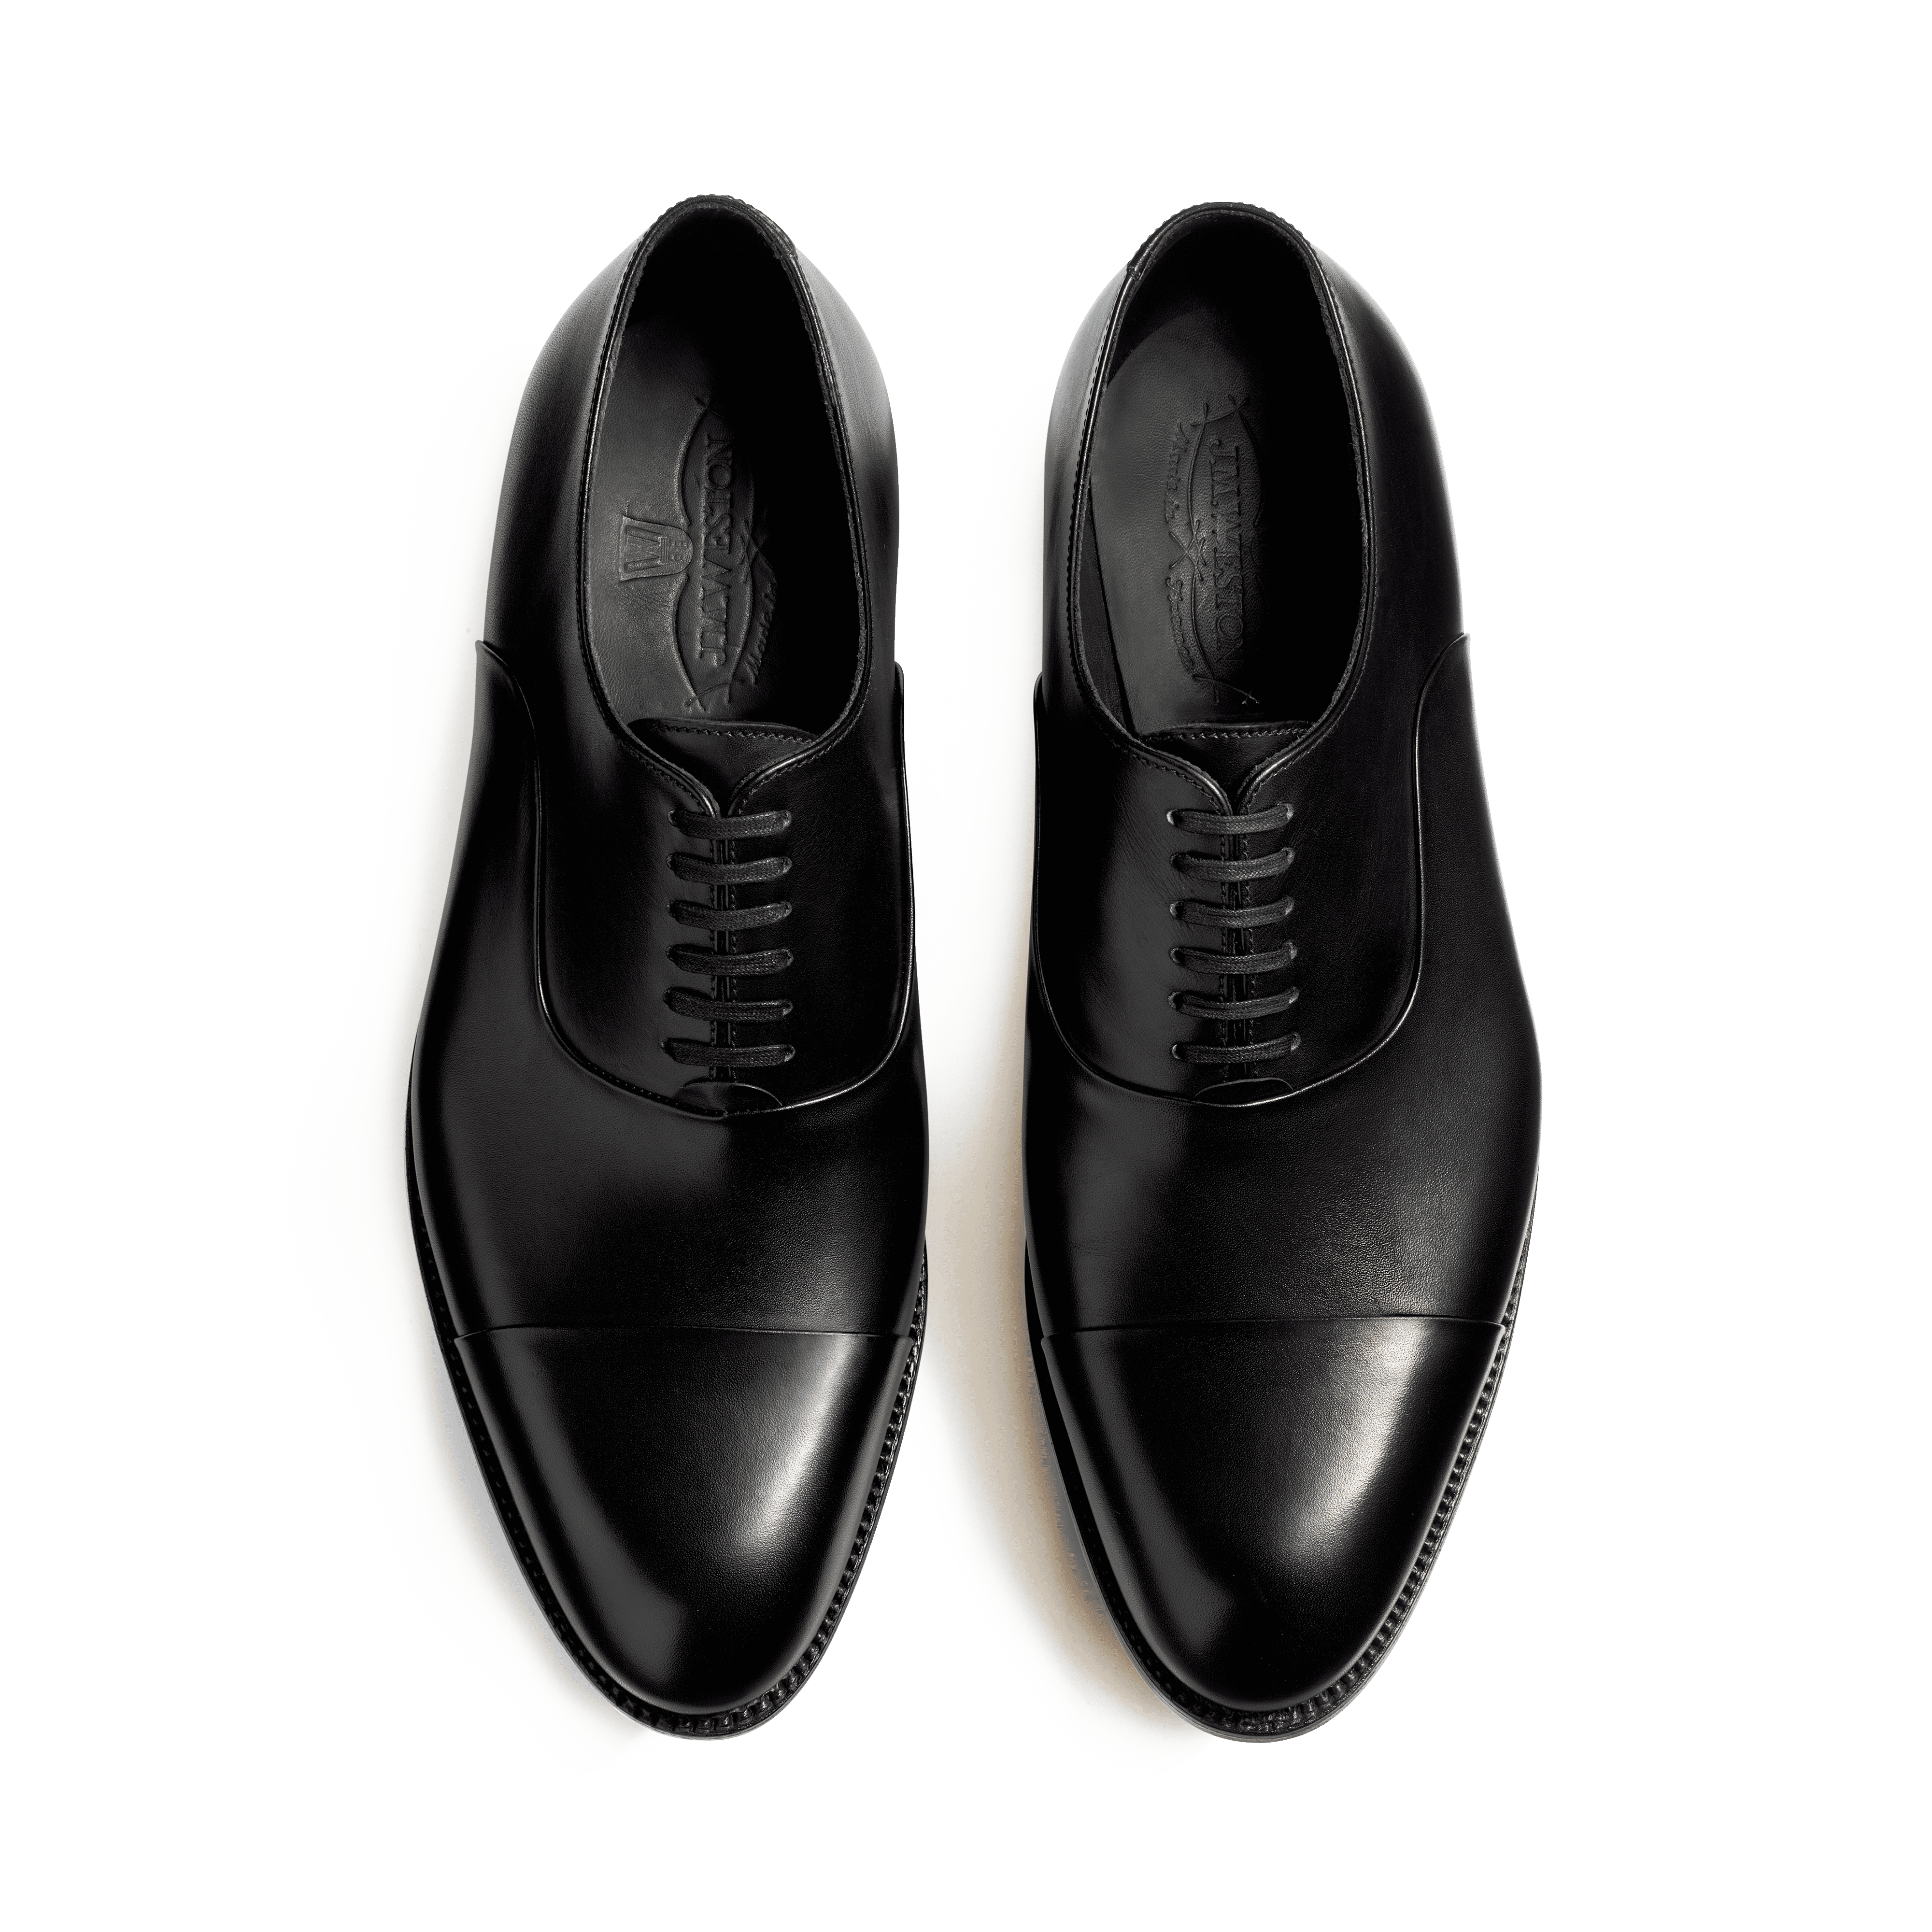 Patent Leather: We Answer All Your Concerns - The Elegant Oxford